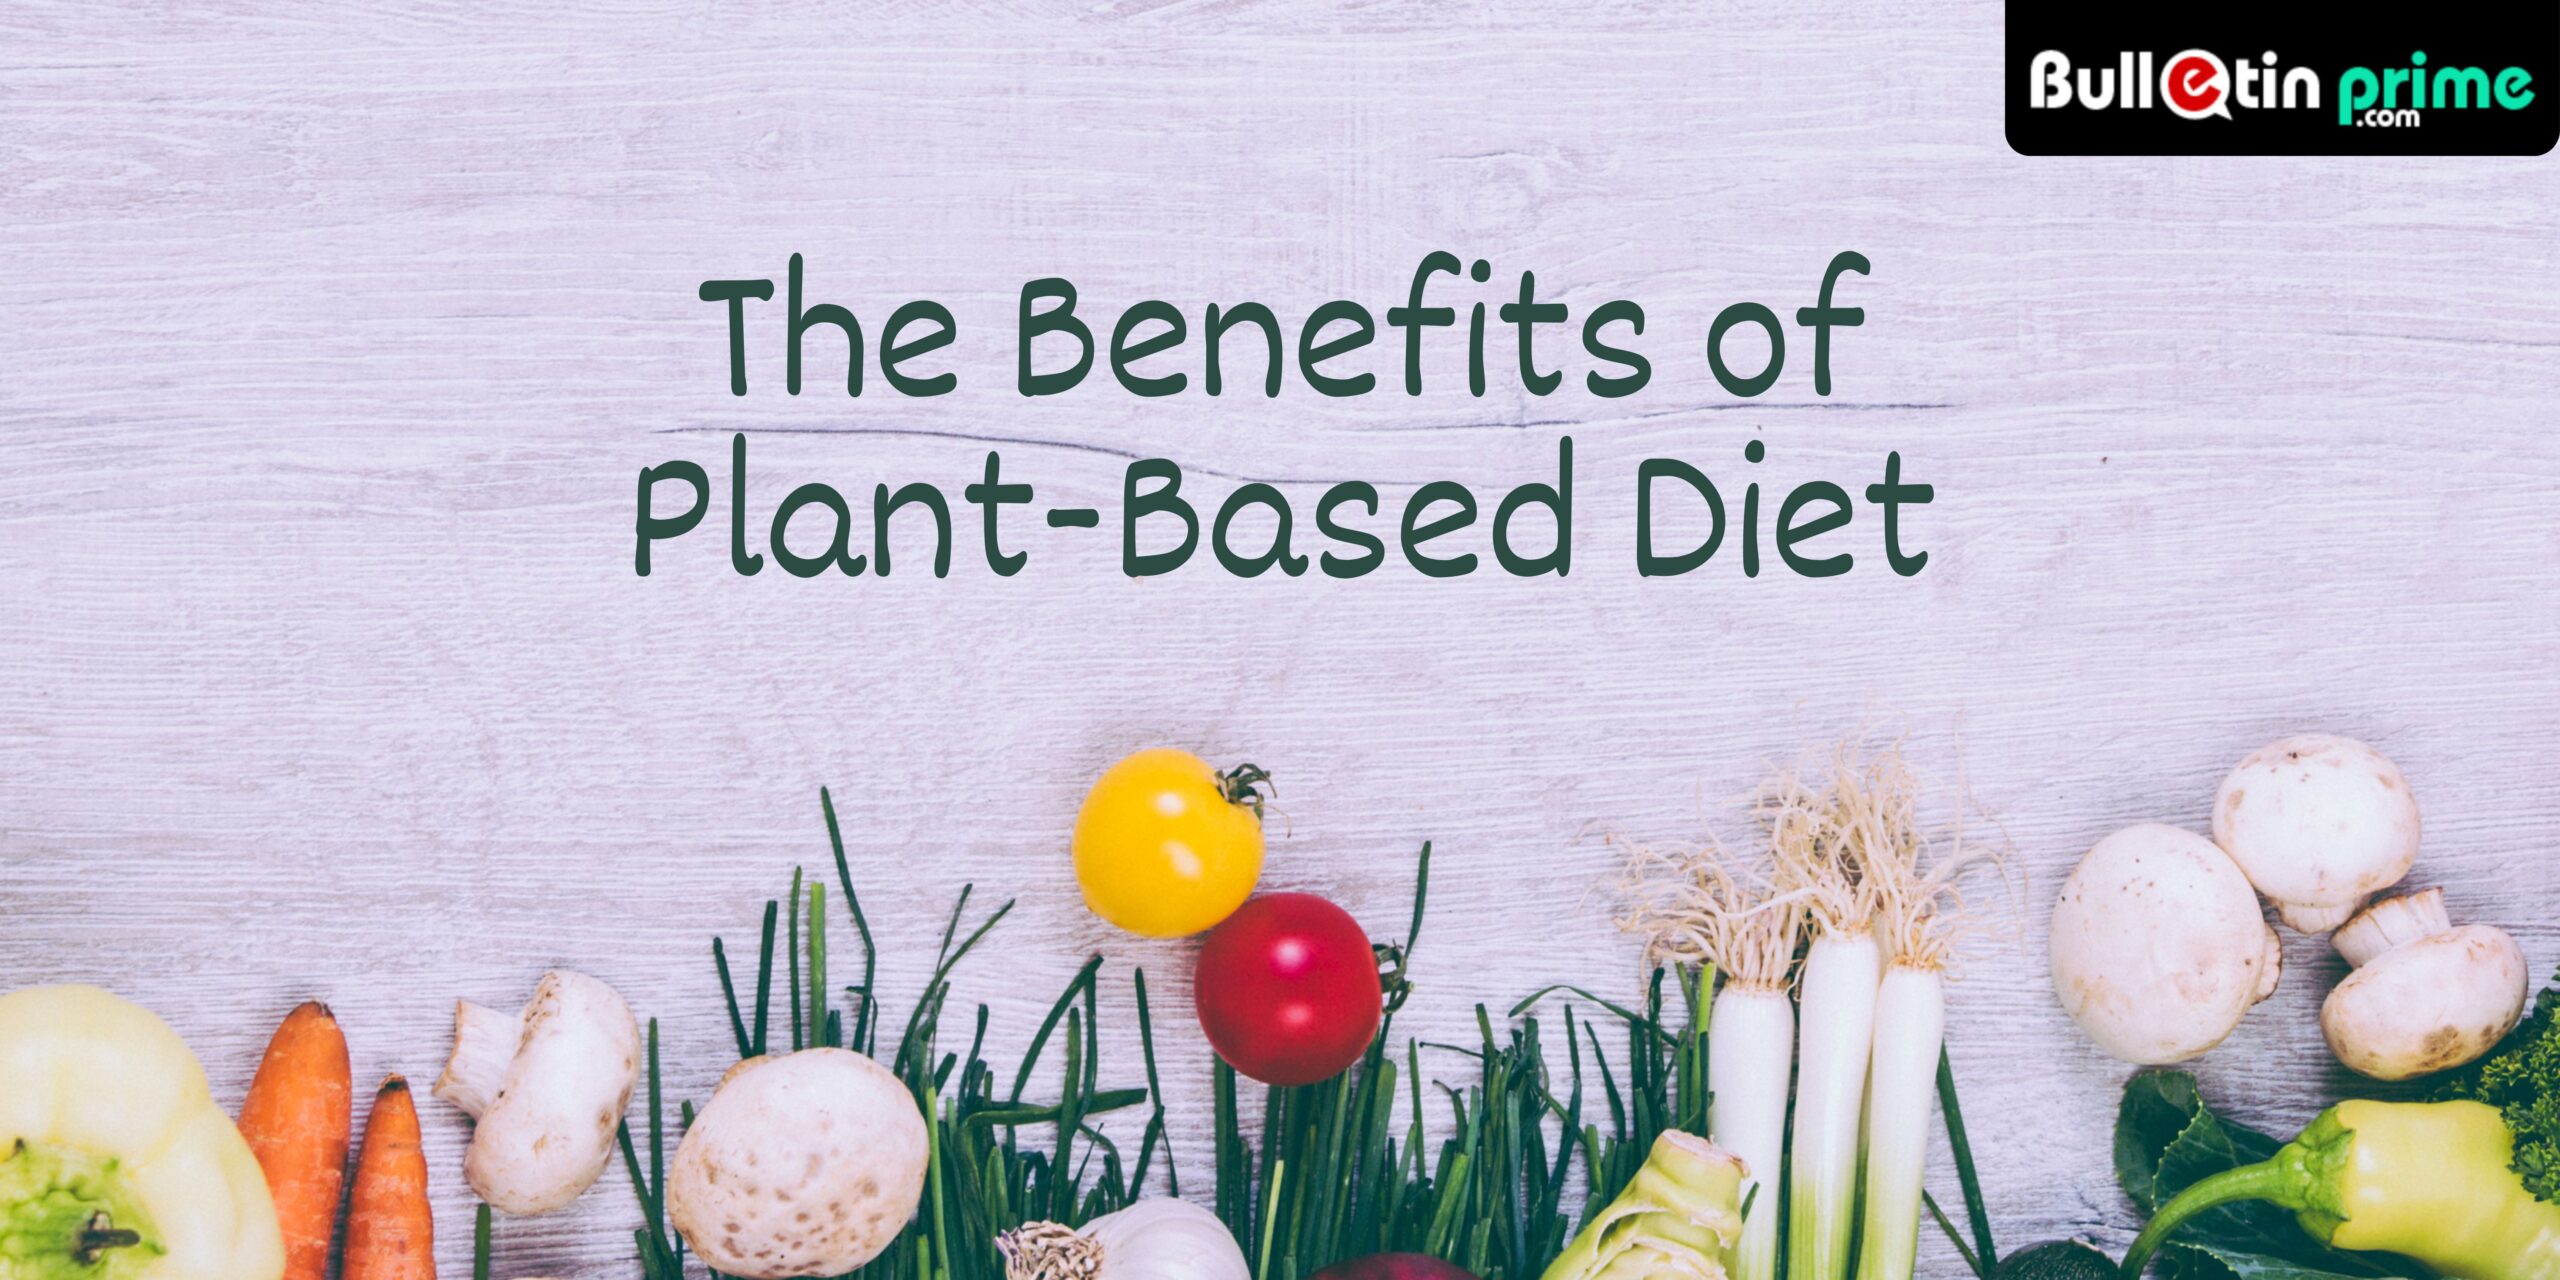 The Benefits of a Plant-Based Diet: Improving Health and the Environment